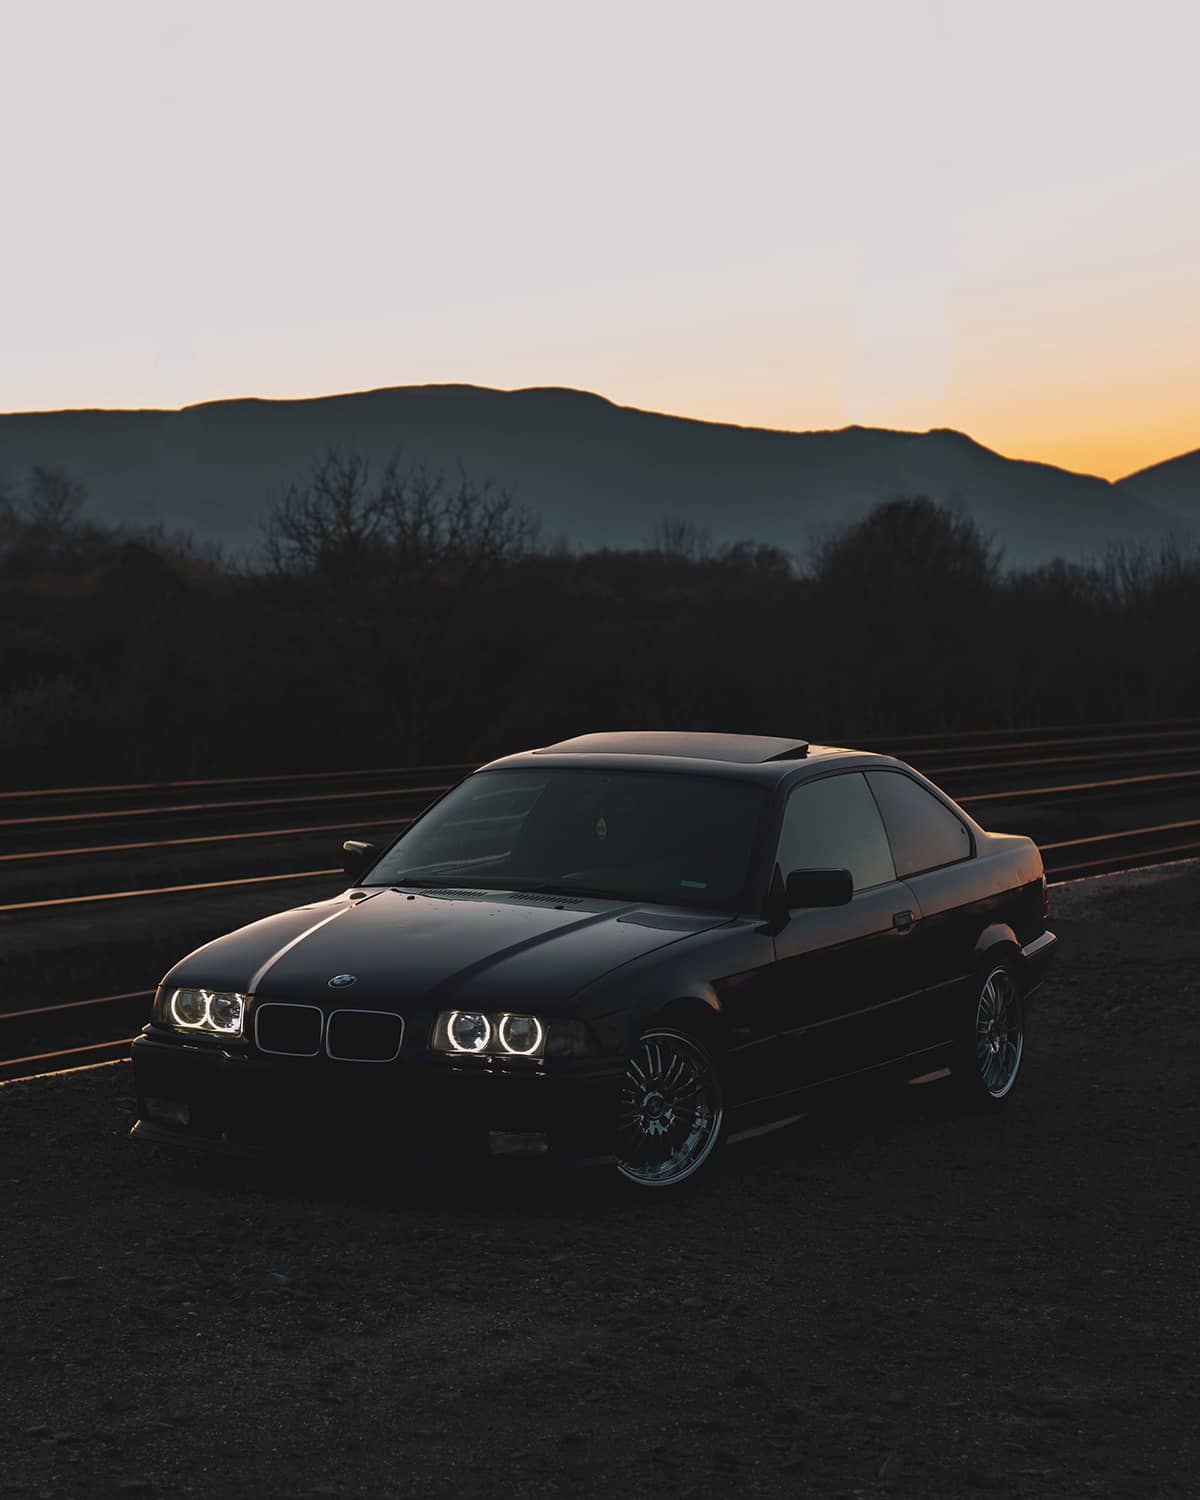 Black BMW E36 Coupe with LED halo rings circles in headlights